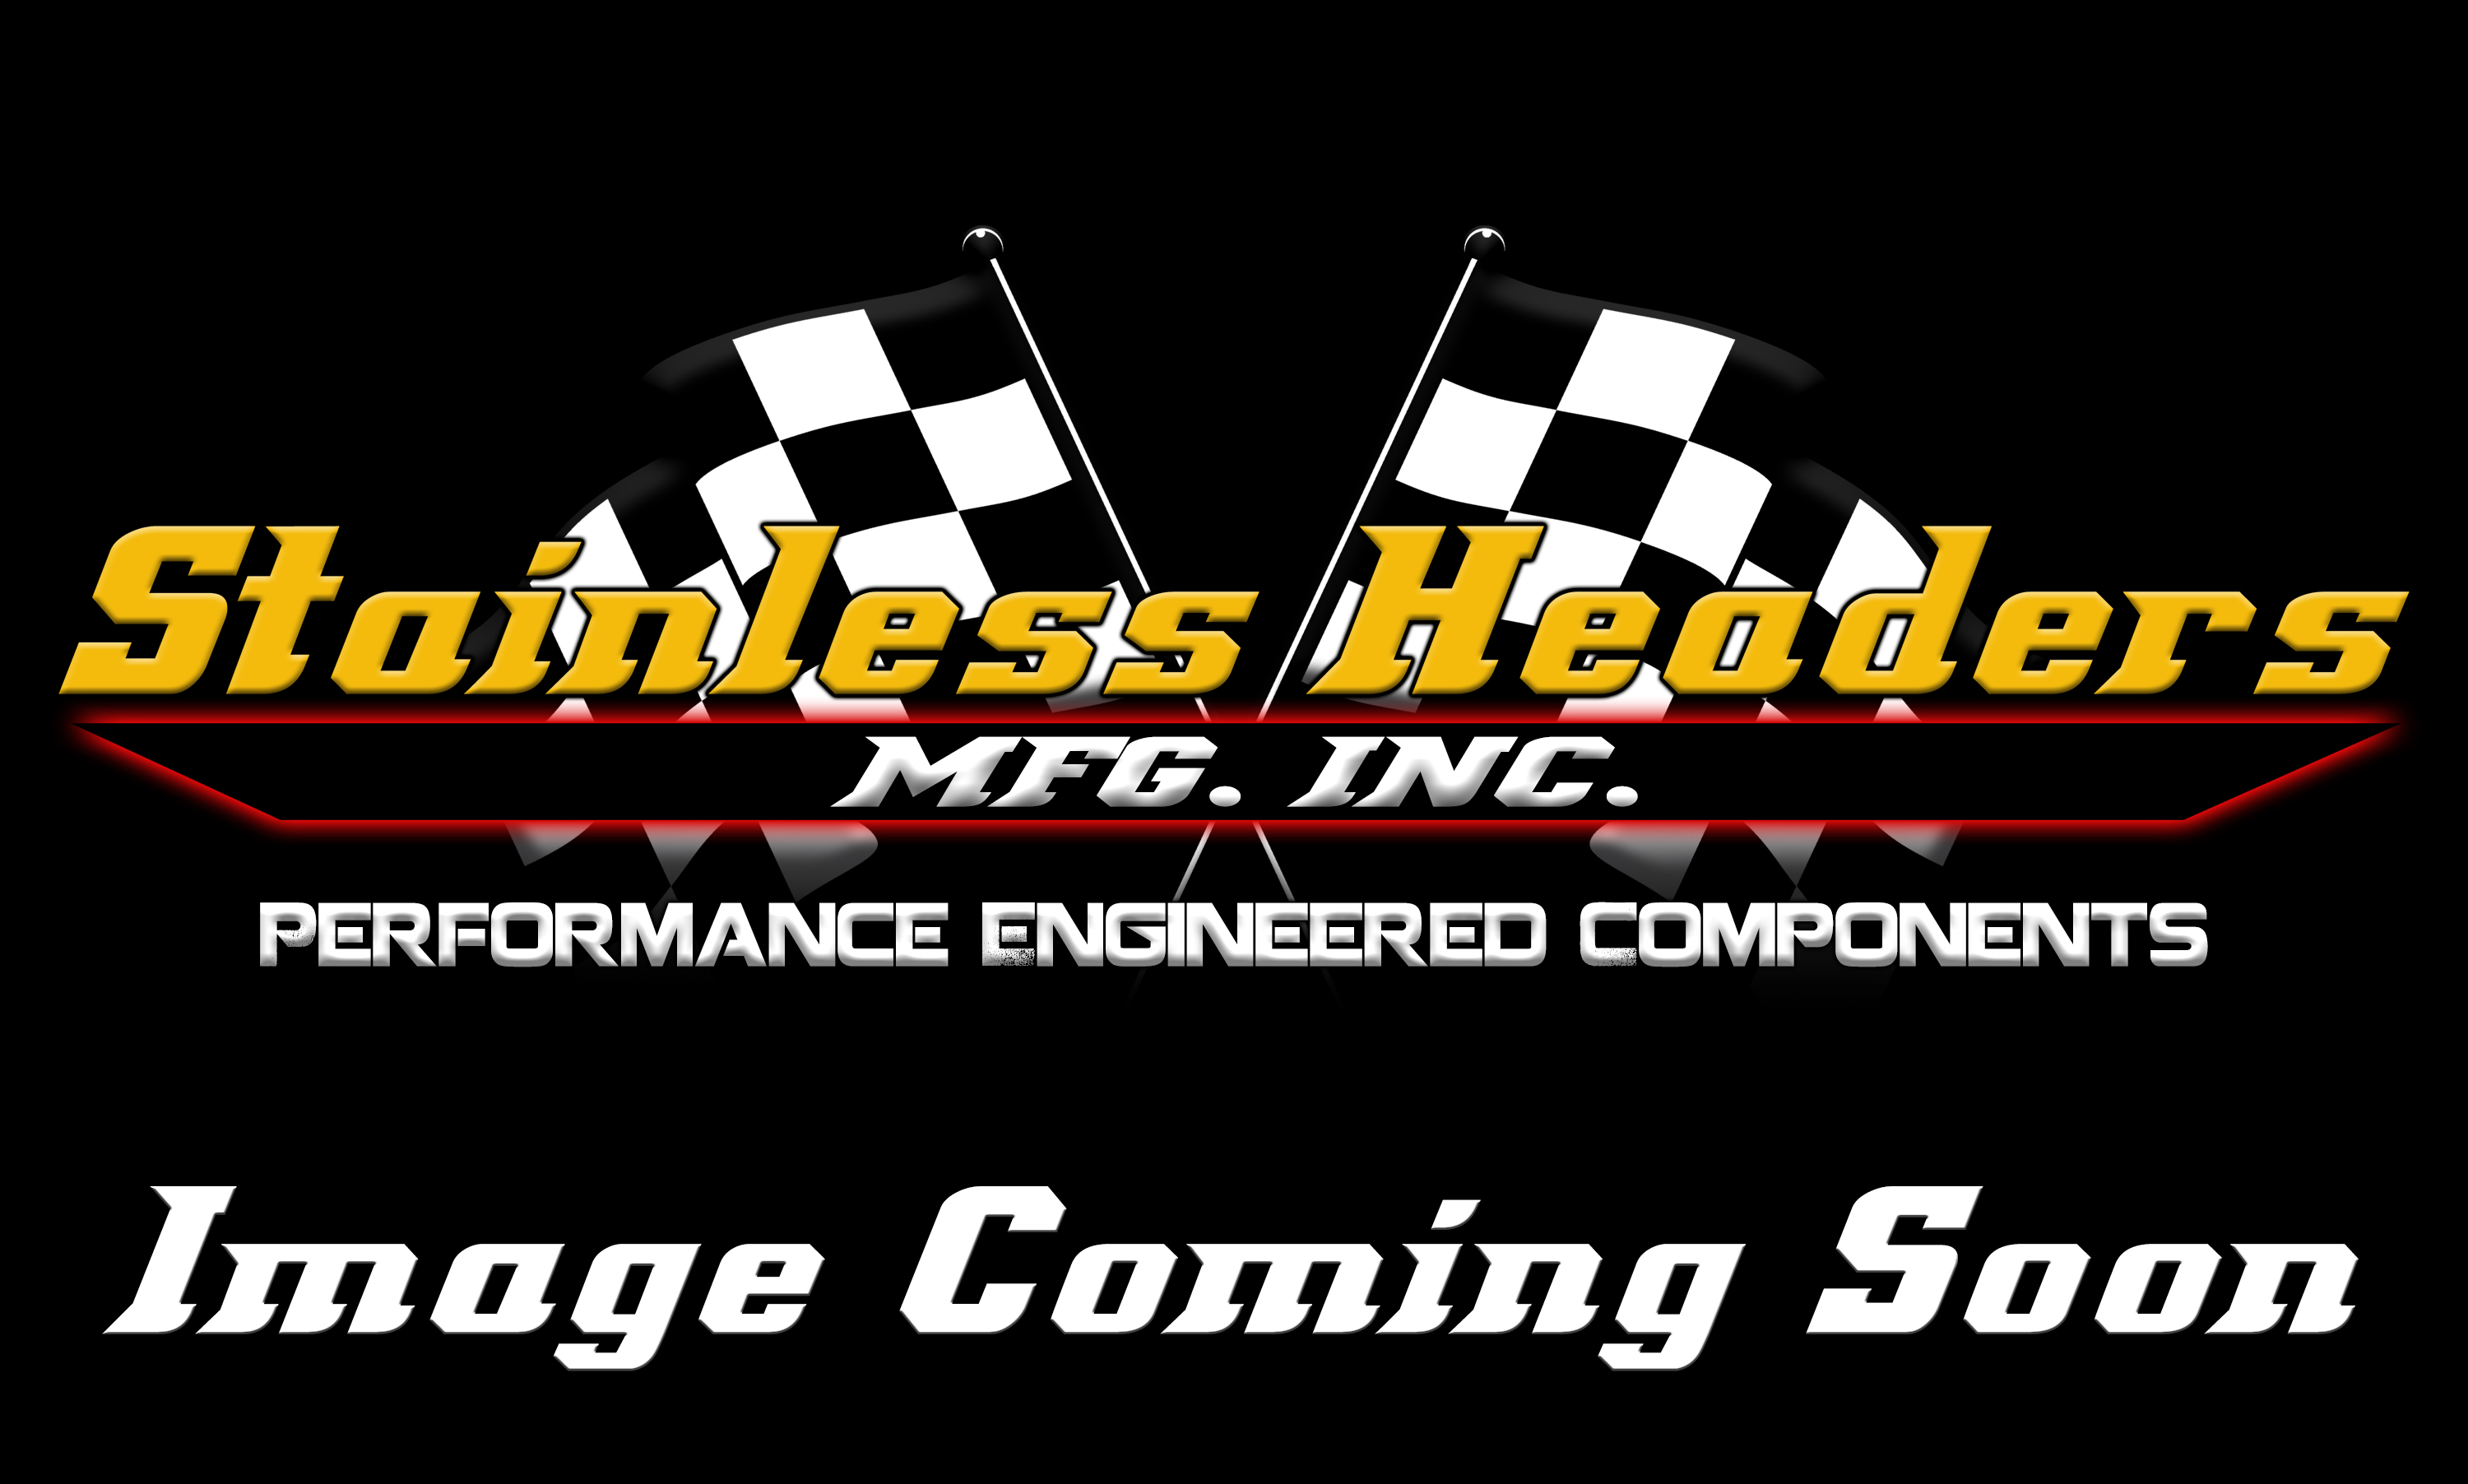 Stainless Headers - 1 7/8" Primary 8 into 1 Performance Merge Collector-16ga 304ss - Image 1